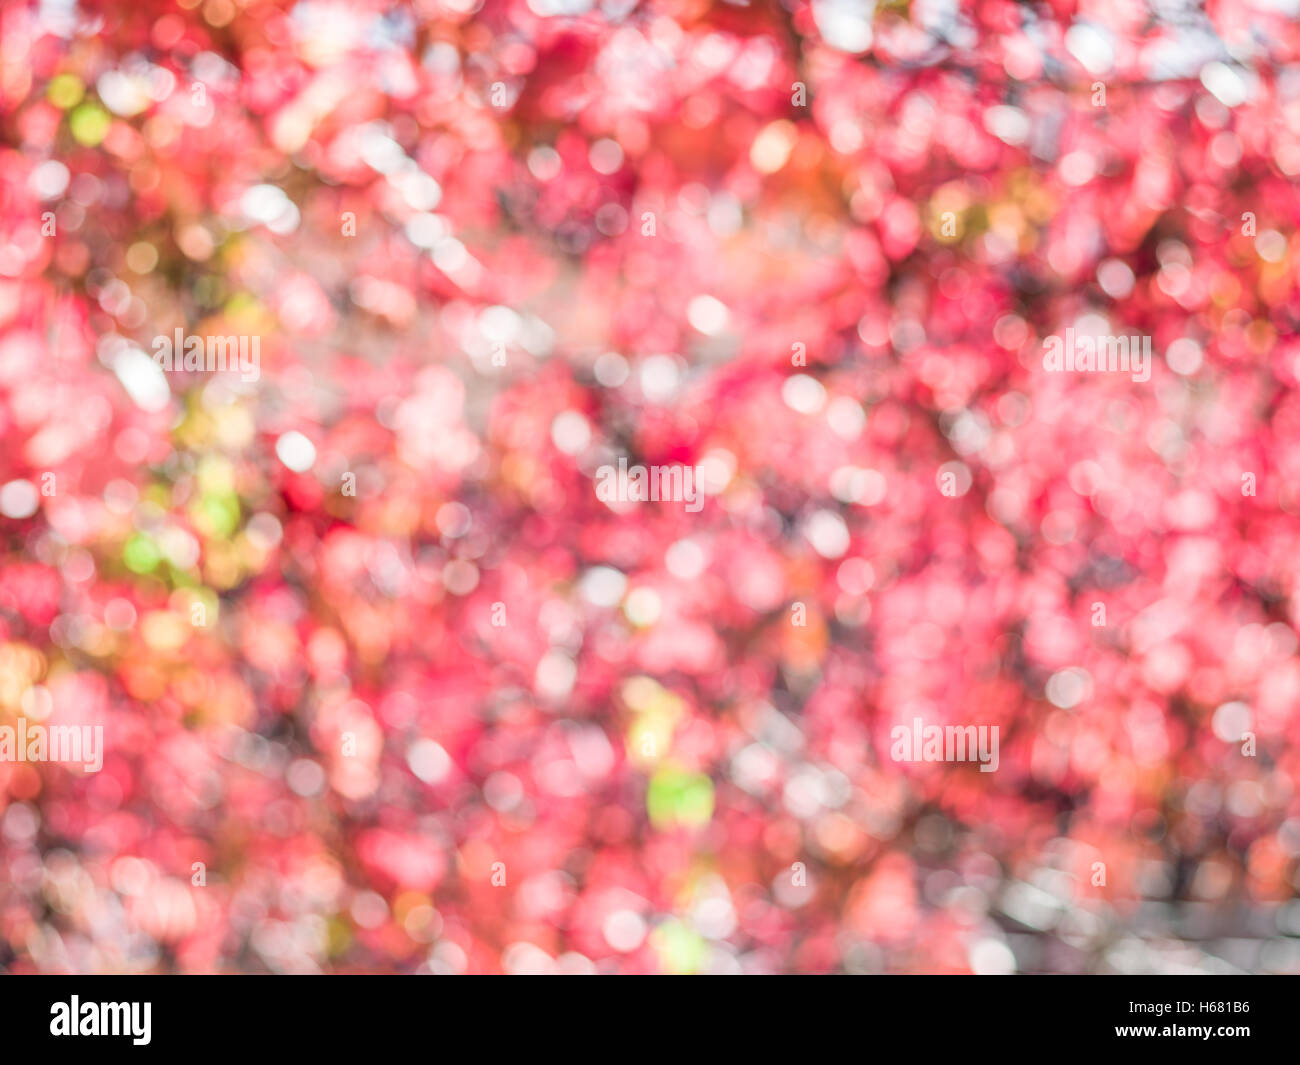 Blurred red leaves. Nature background. Stock Photo